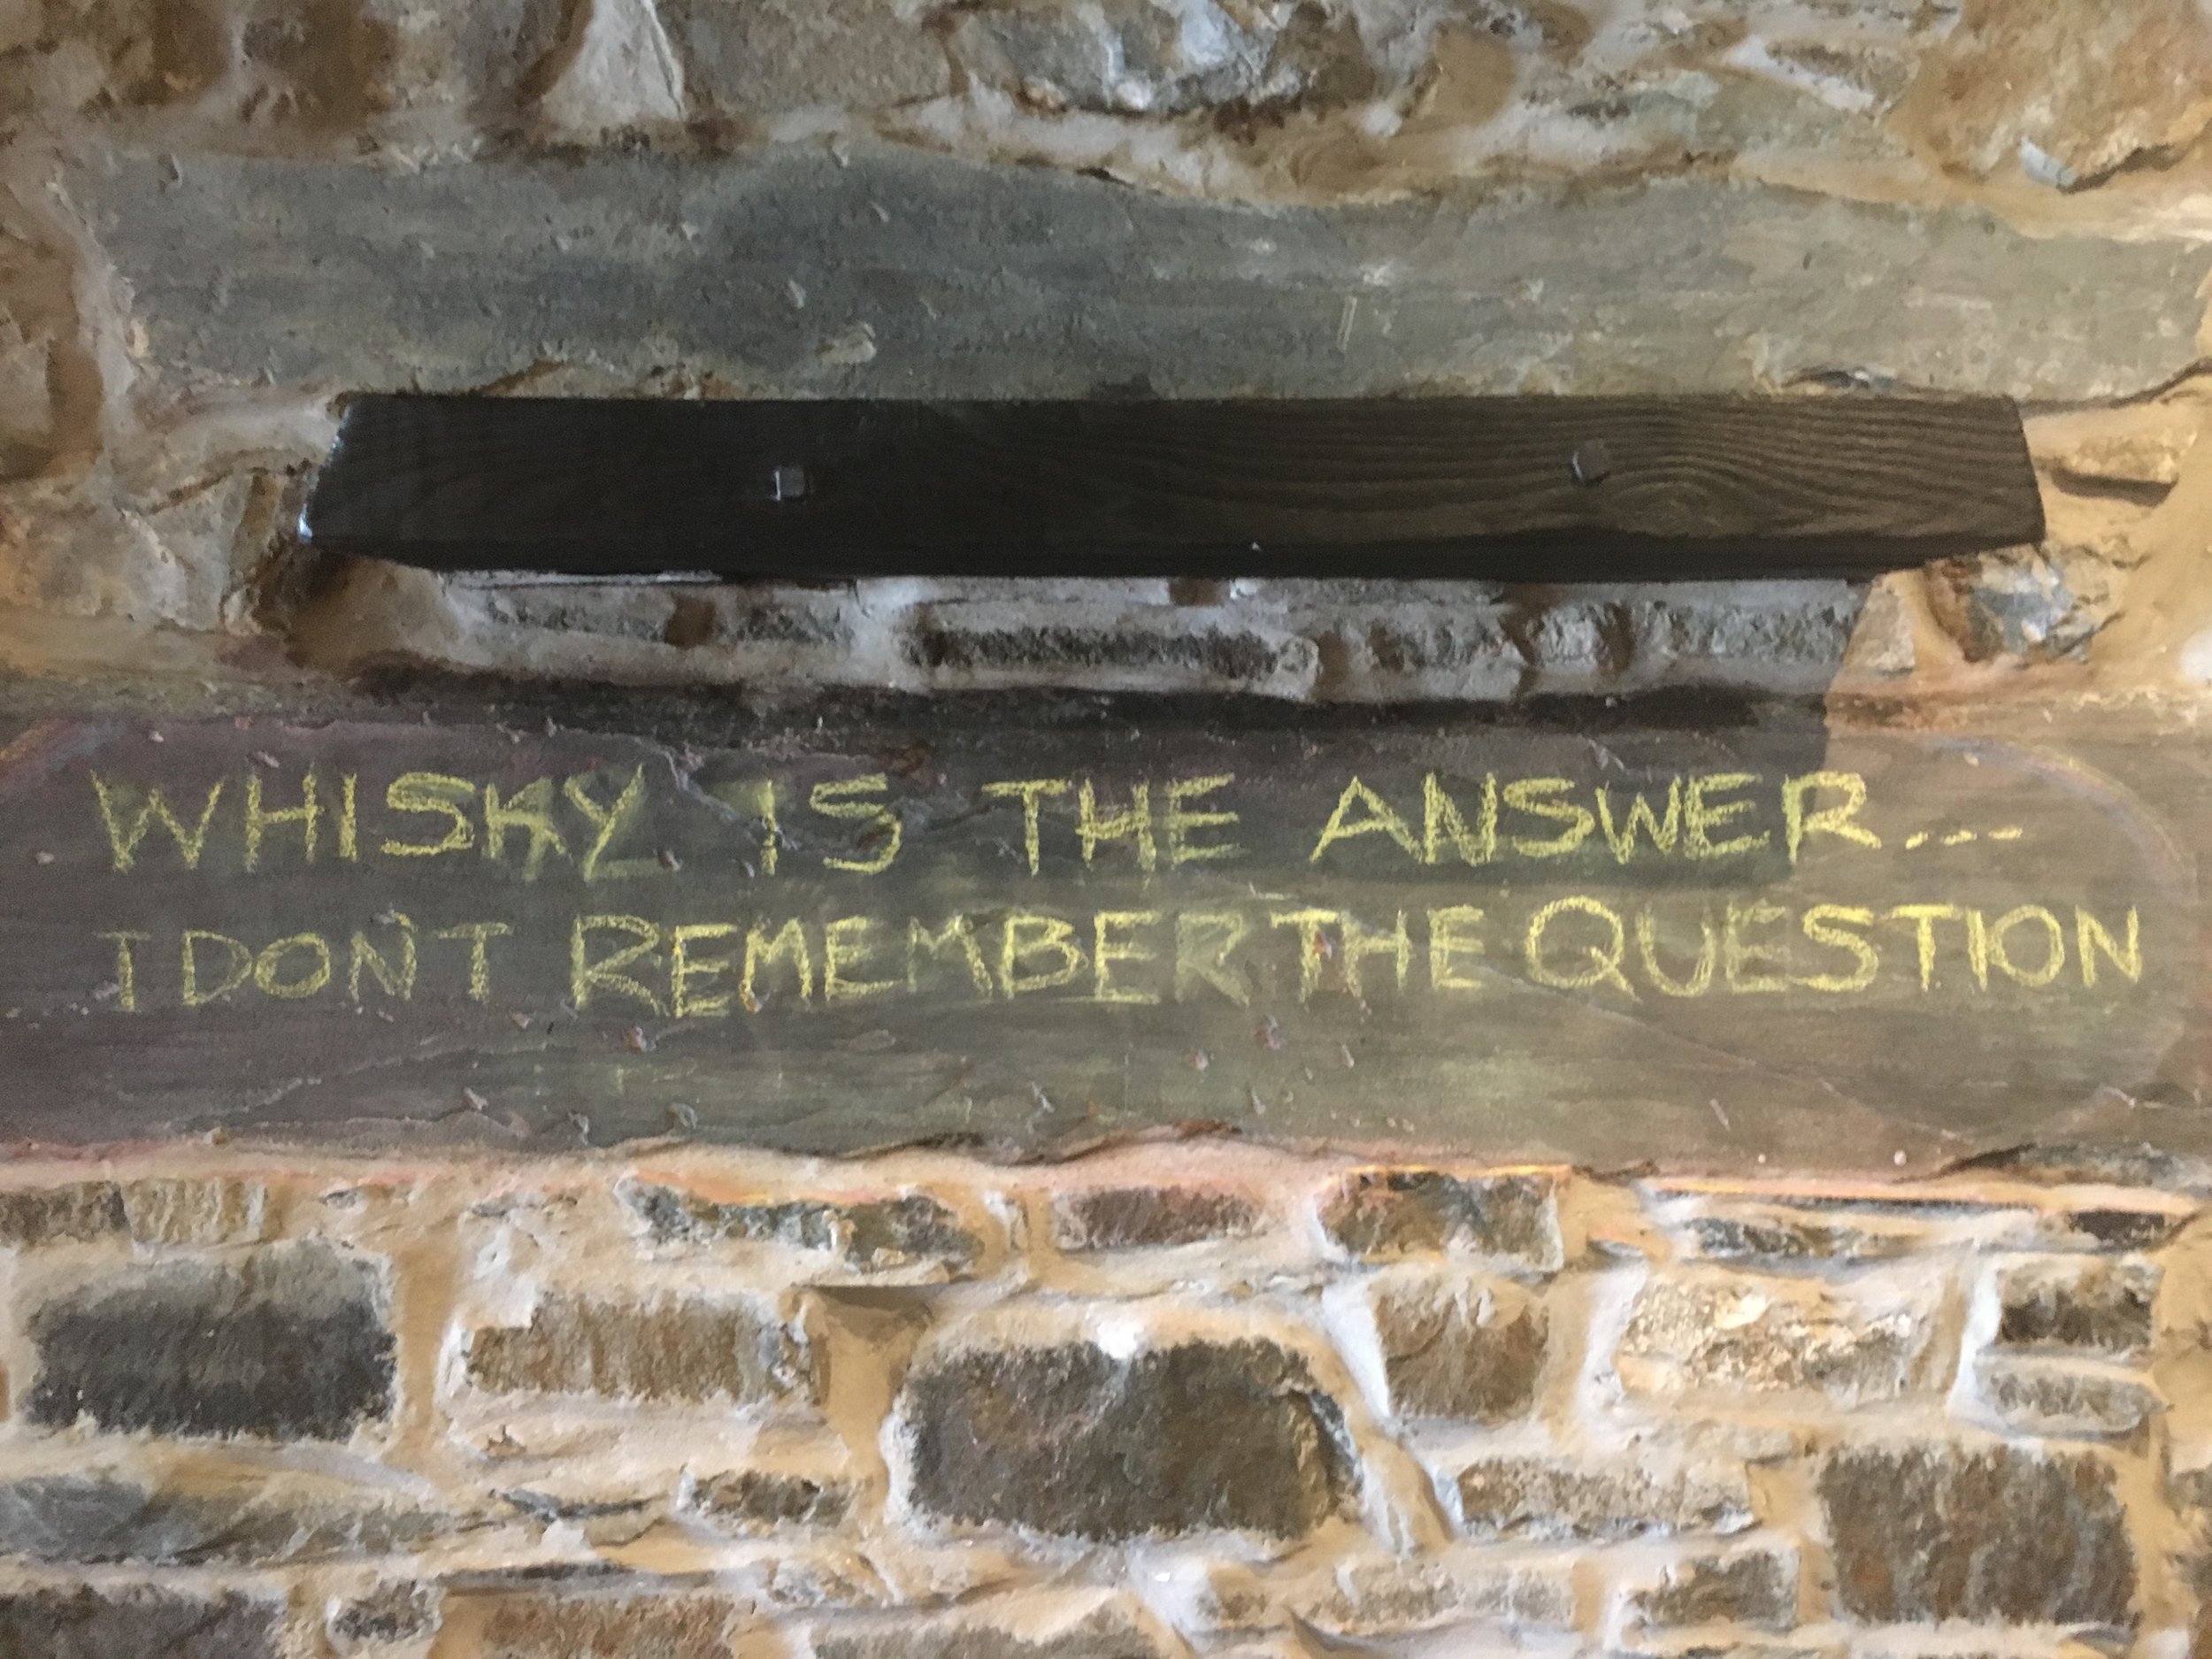 Whisky is the answer.  I don't remember the question.